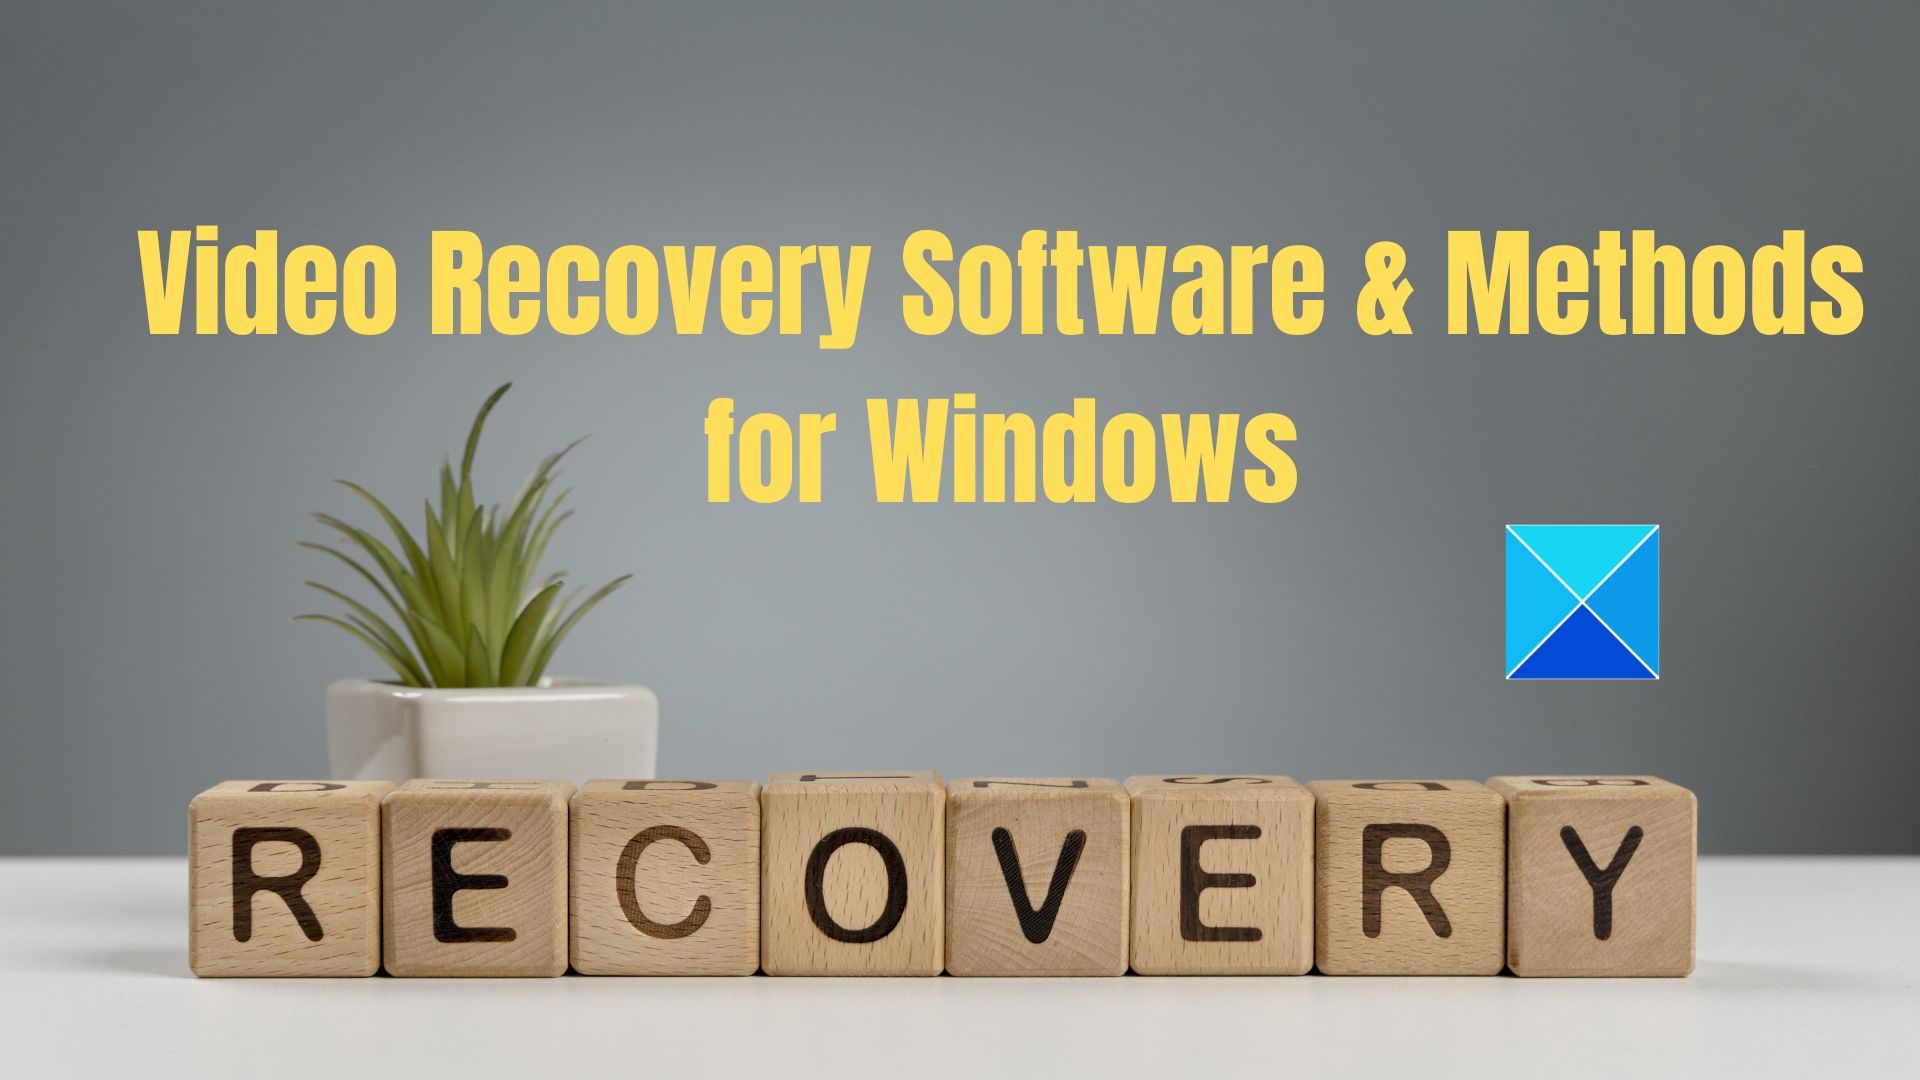 Video Recovery Software & Methods for Windows